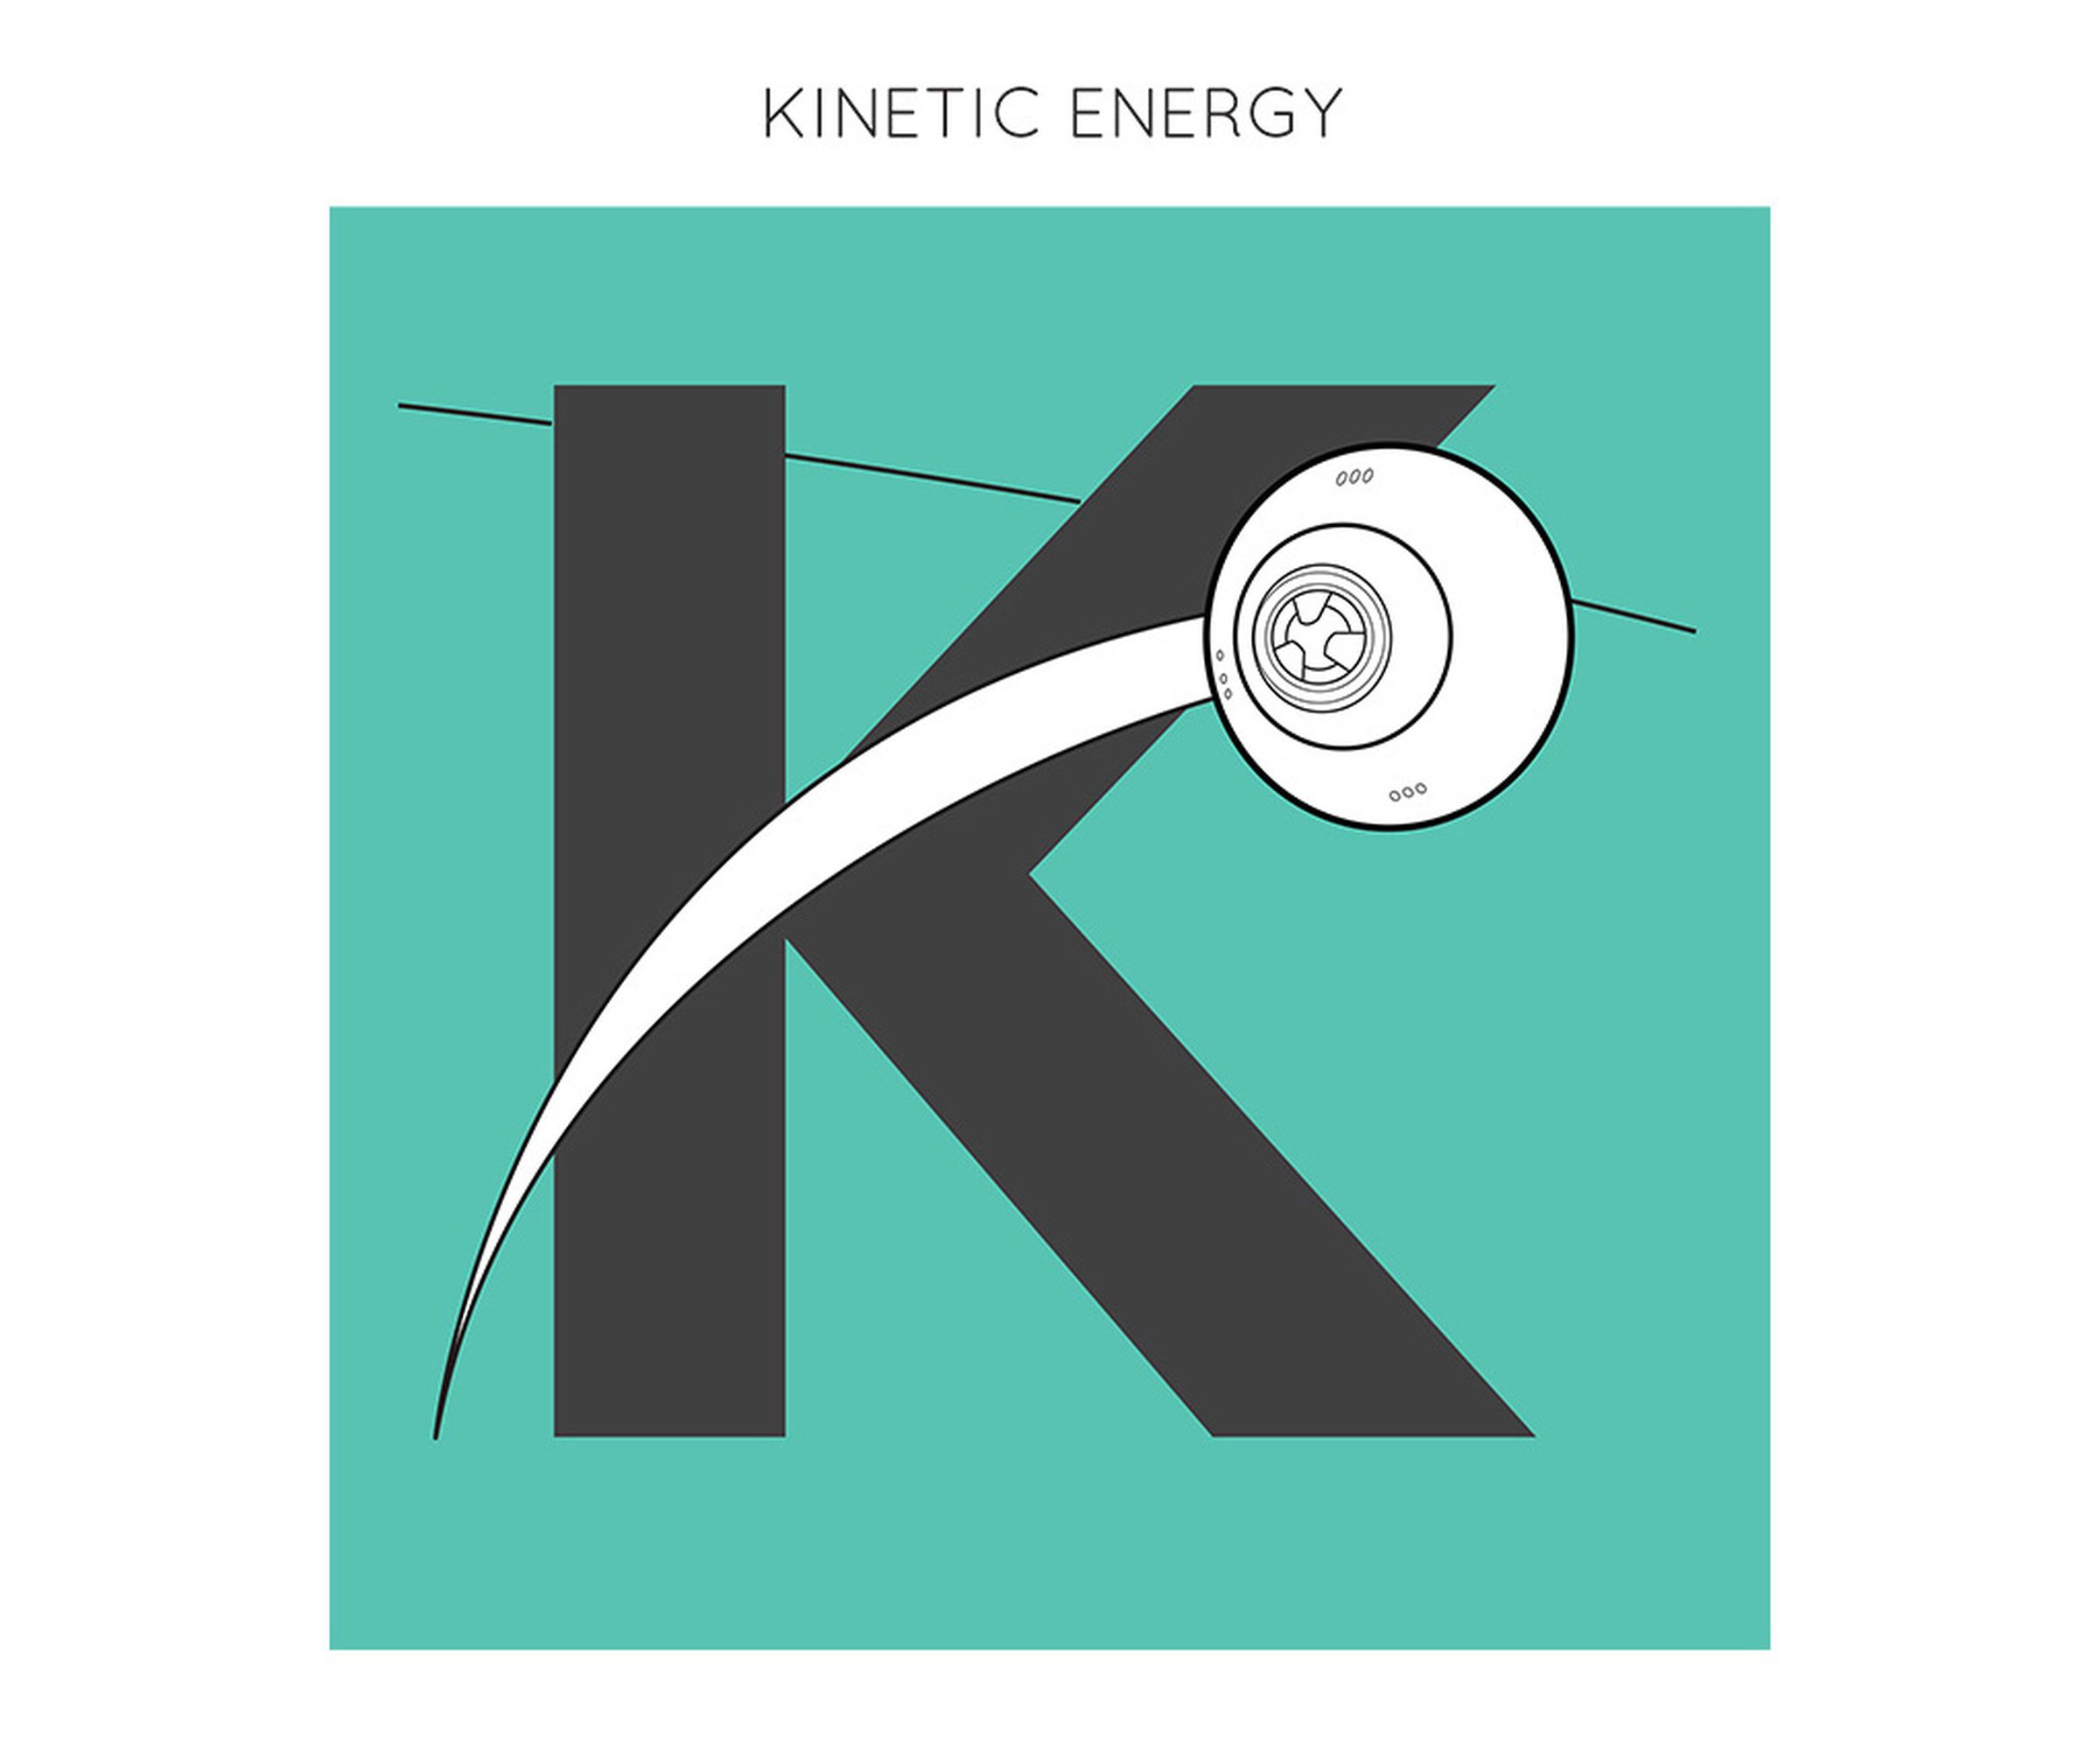 K is for Kinetic